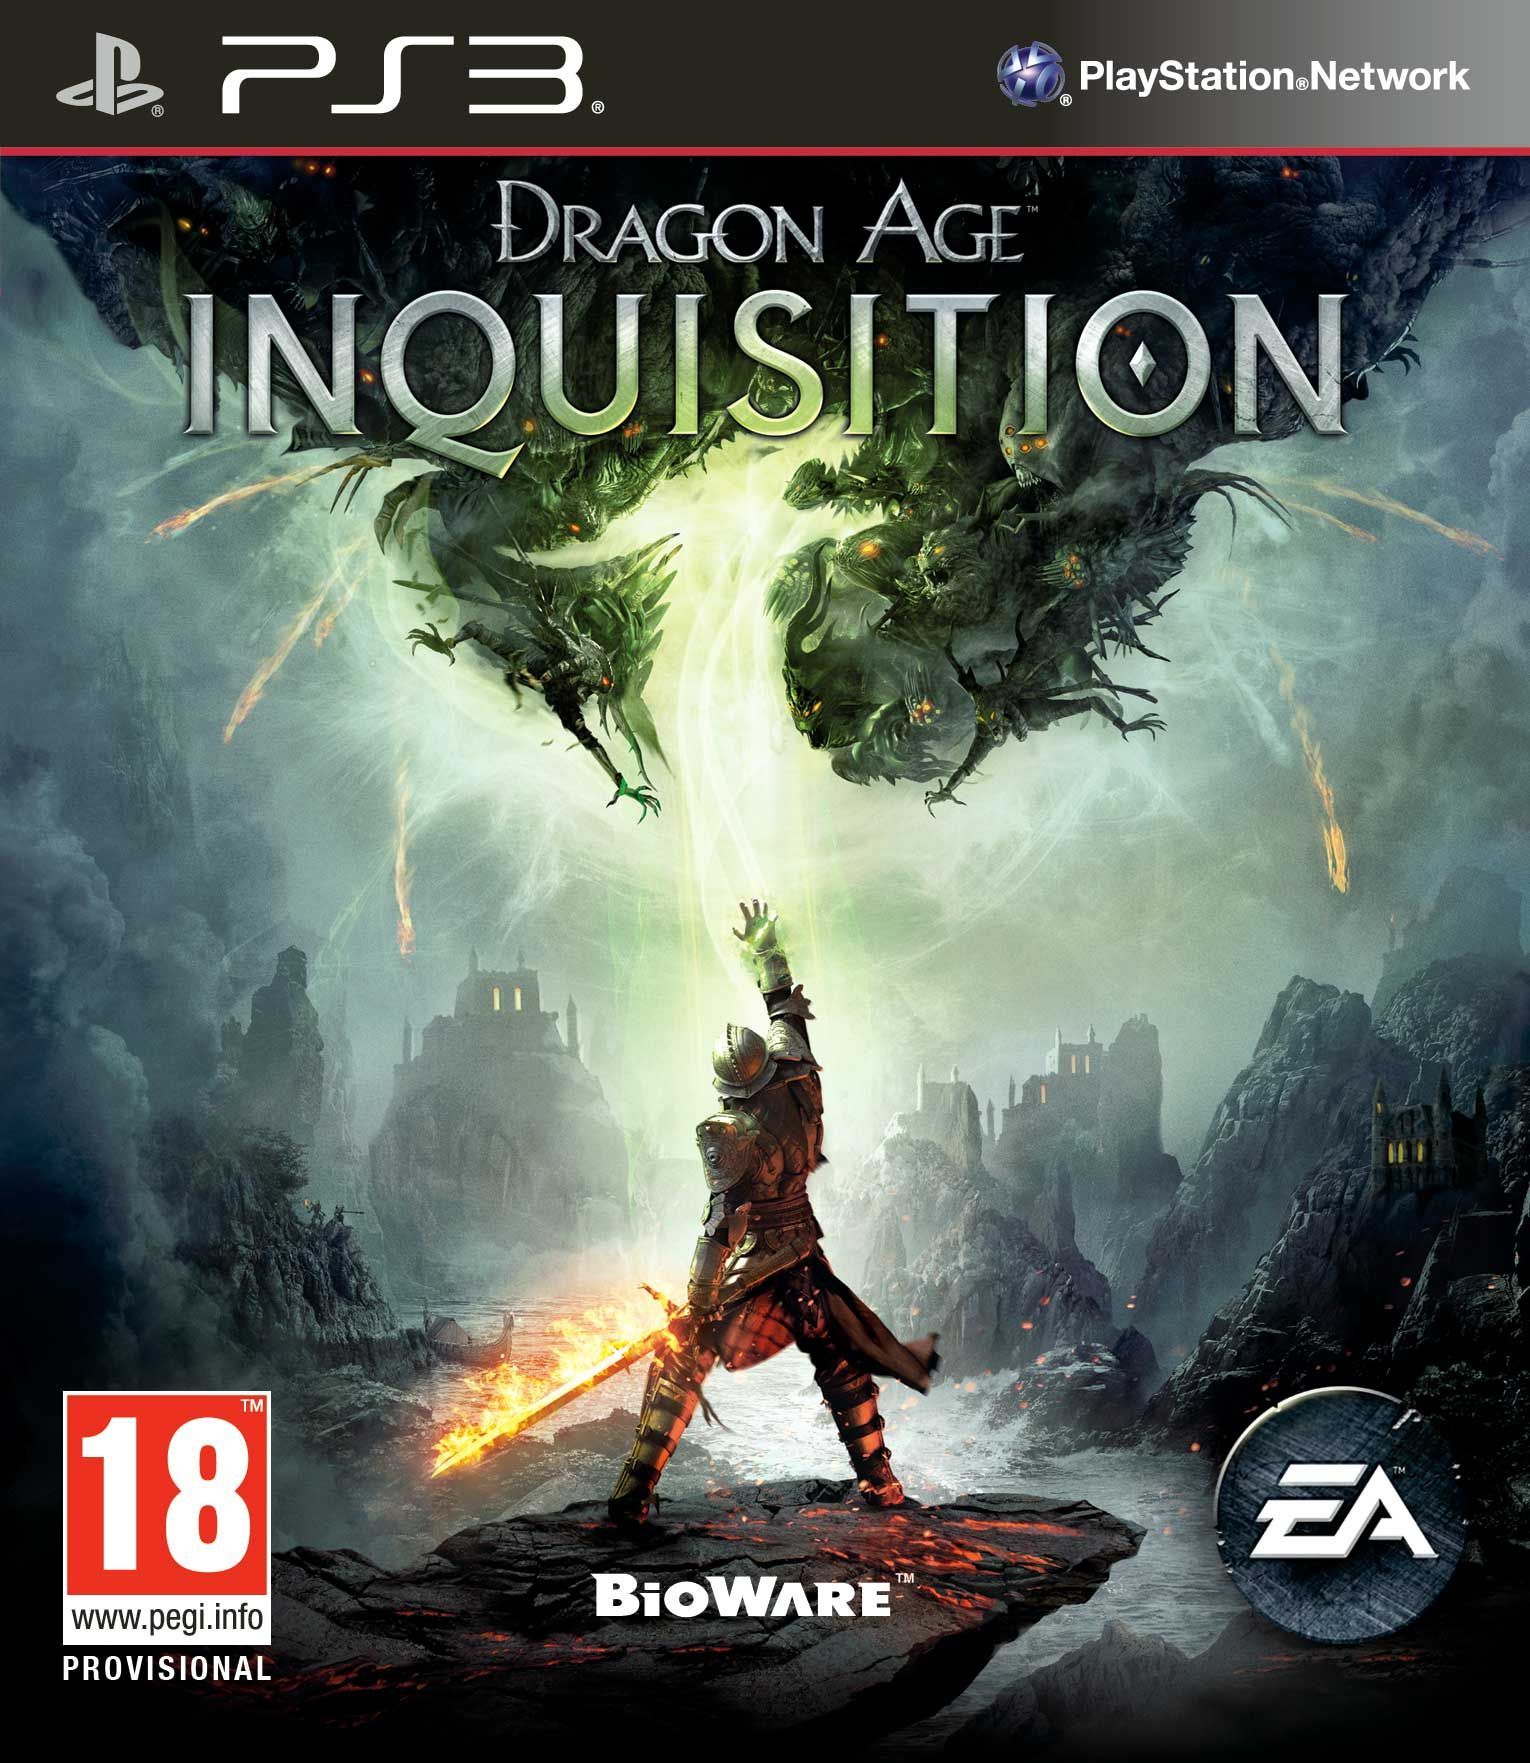 Dragon Age III (3): Inquisition (Essentials), Electronic Arts